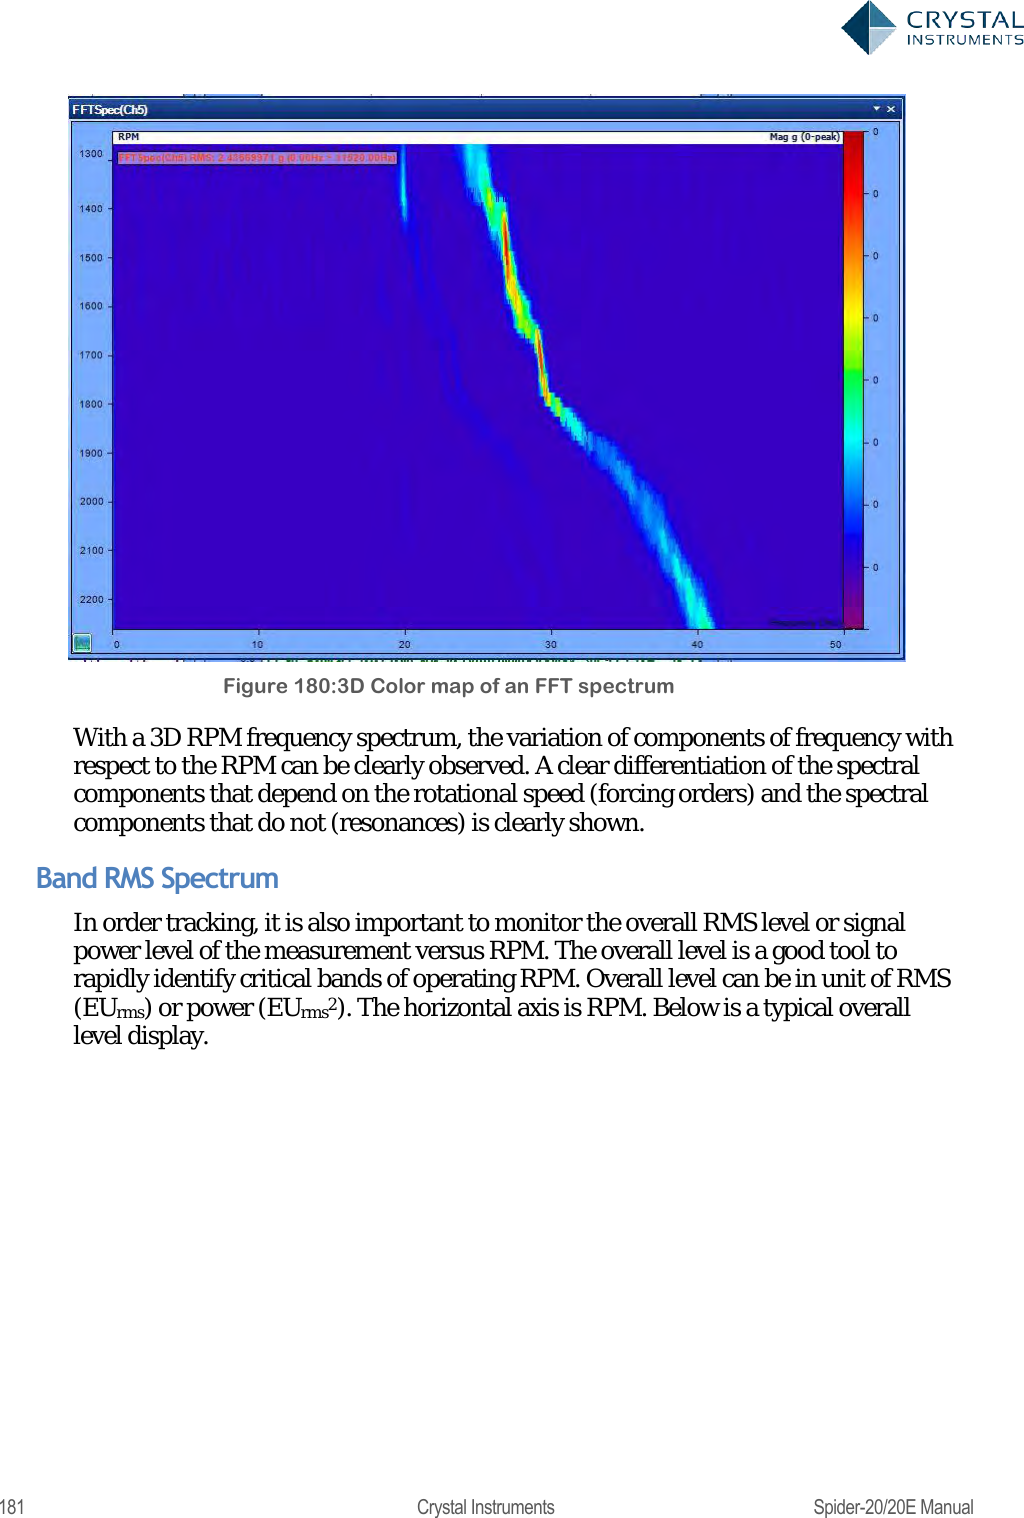  181  Crystal Instruments  Spider-20/20E Manual  Figure 180:3D Color map of an FFT spectrum With a 3D RPM frequency spectrum, the variation of components of frequency with respect to the RPM can be clearly observed. A clear differentiation of the spectral components that depend on the rotational speed (forcing orders) and the spectral components that do not (resonances) is clearly shown. Band RMS Spectrum In order tracking, it is also important to monitor the overall RMS level or signal power level of the measurement versus RPM. The overall level is a good tool to rapidly identify critical bands of operating RPM. Overall level can be in unit of RMS (EUrms) or power (EUrms2). The horizontal axis is RPM. Below is a typical overall level display.   